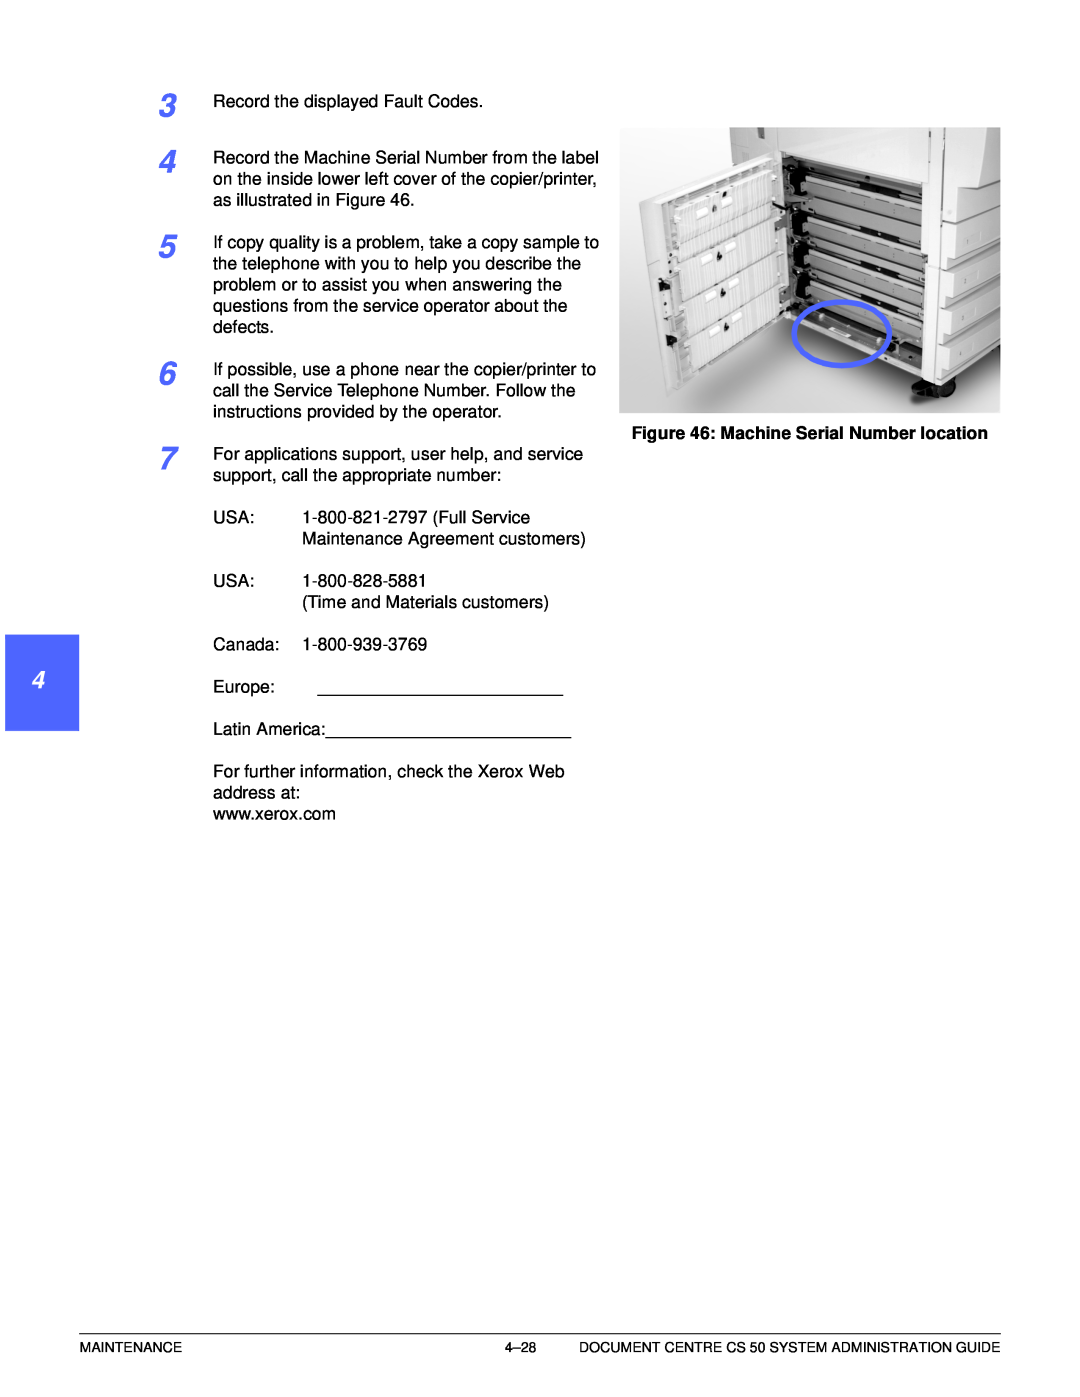 Xerox 50 manual 1 2 4 5 6 7, Record the displayed Fault Codes 